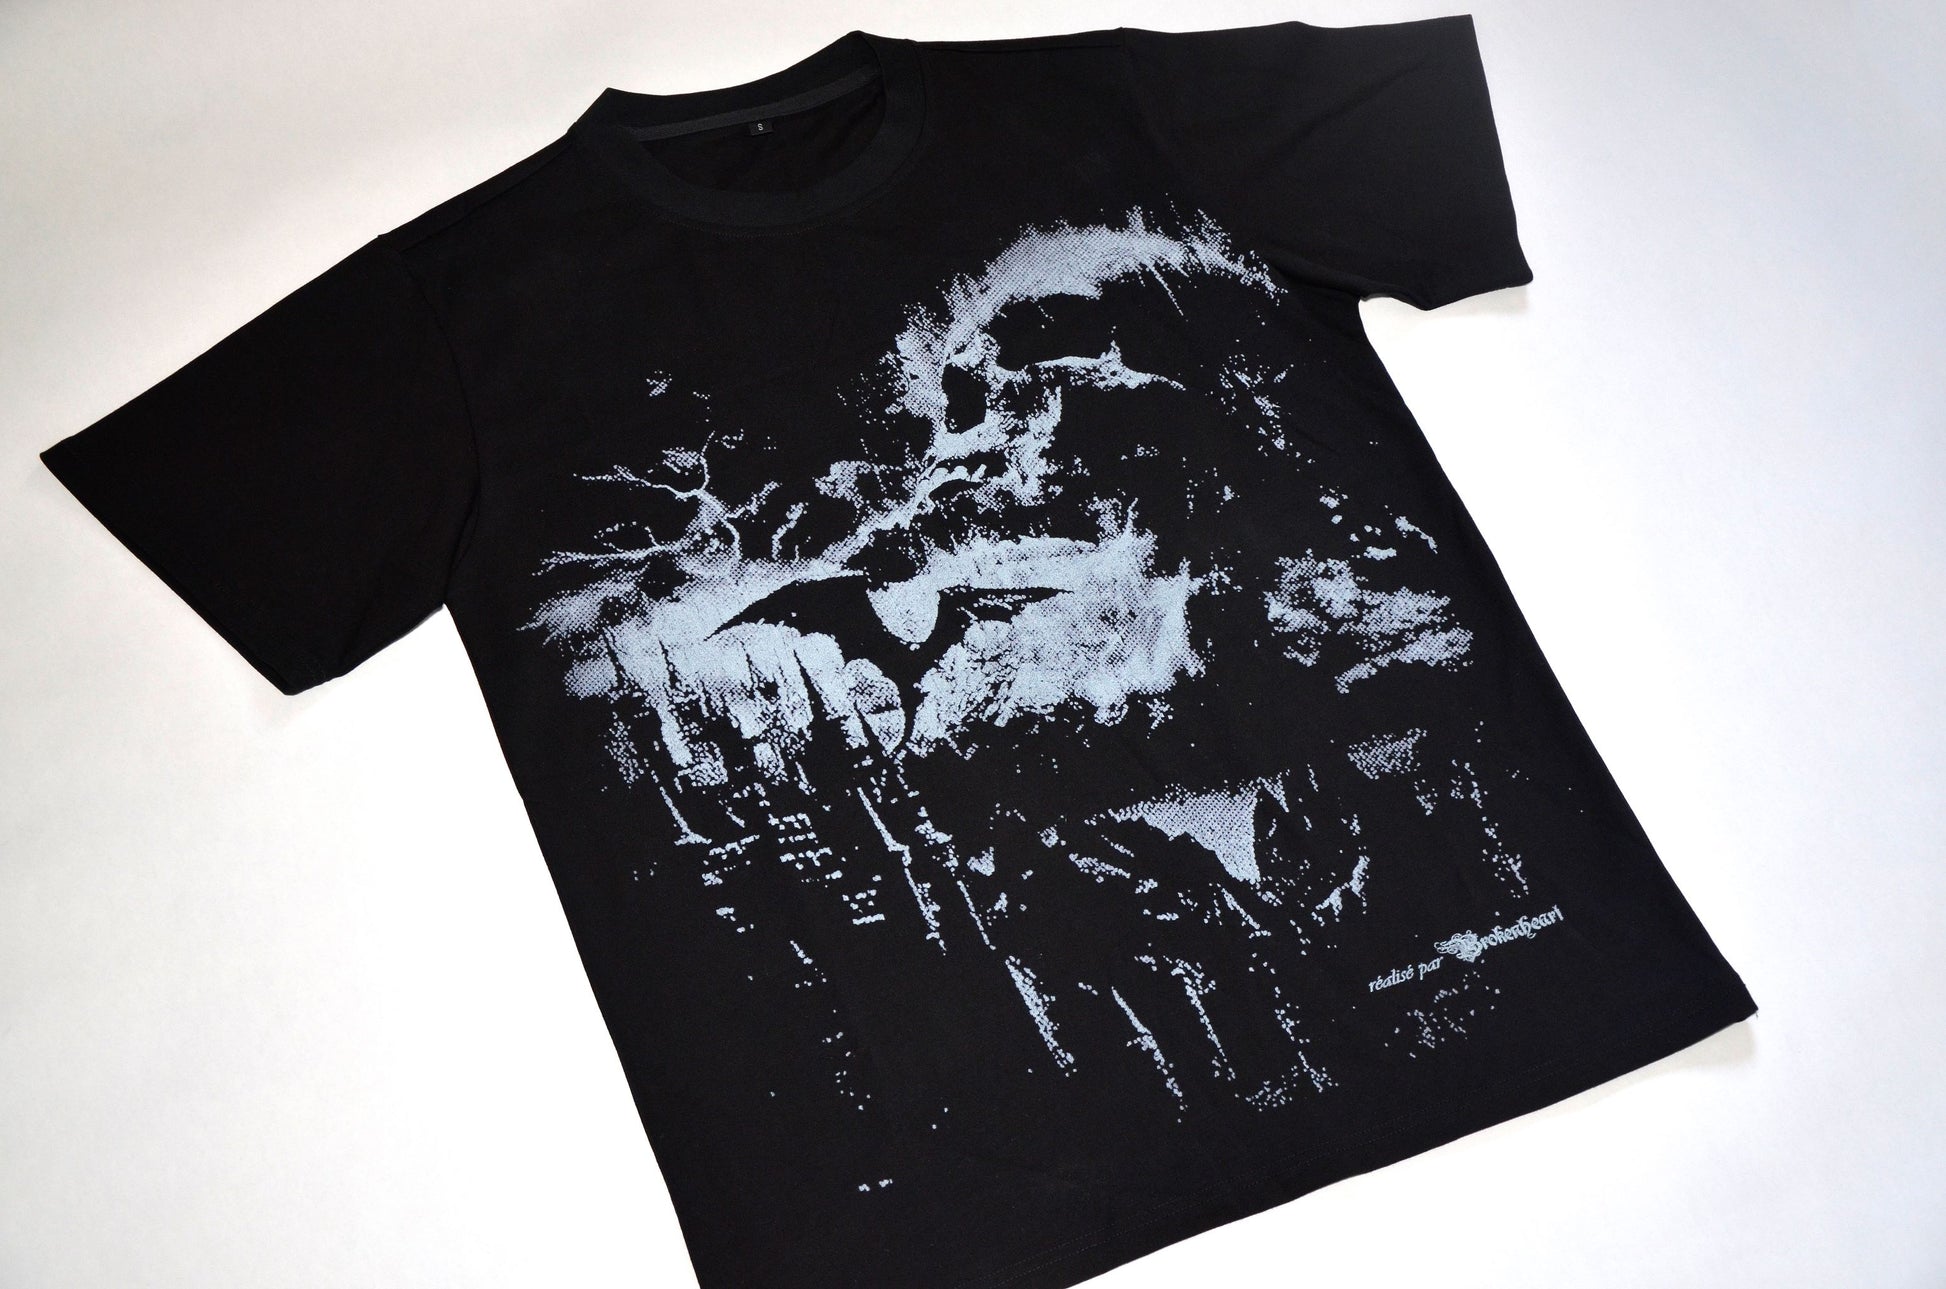 Graphic Tee inspired from Emo, Punk and Metal aesthetics. Dark Graphic T-shirt 100% cotton and true to size. Size up for oversized fit. Premade ships within a week. 2 color no feel print. The Last Judgment is upon us… Le Jour Dernier est arrivé….